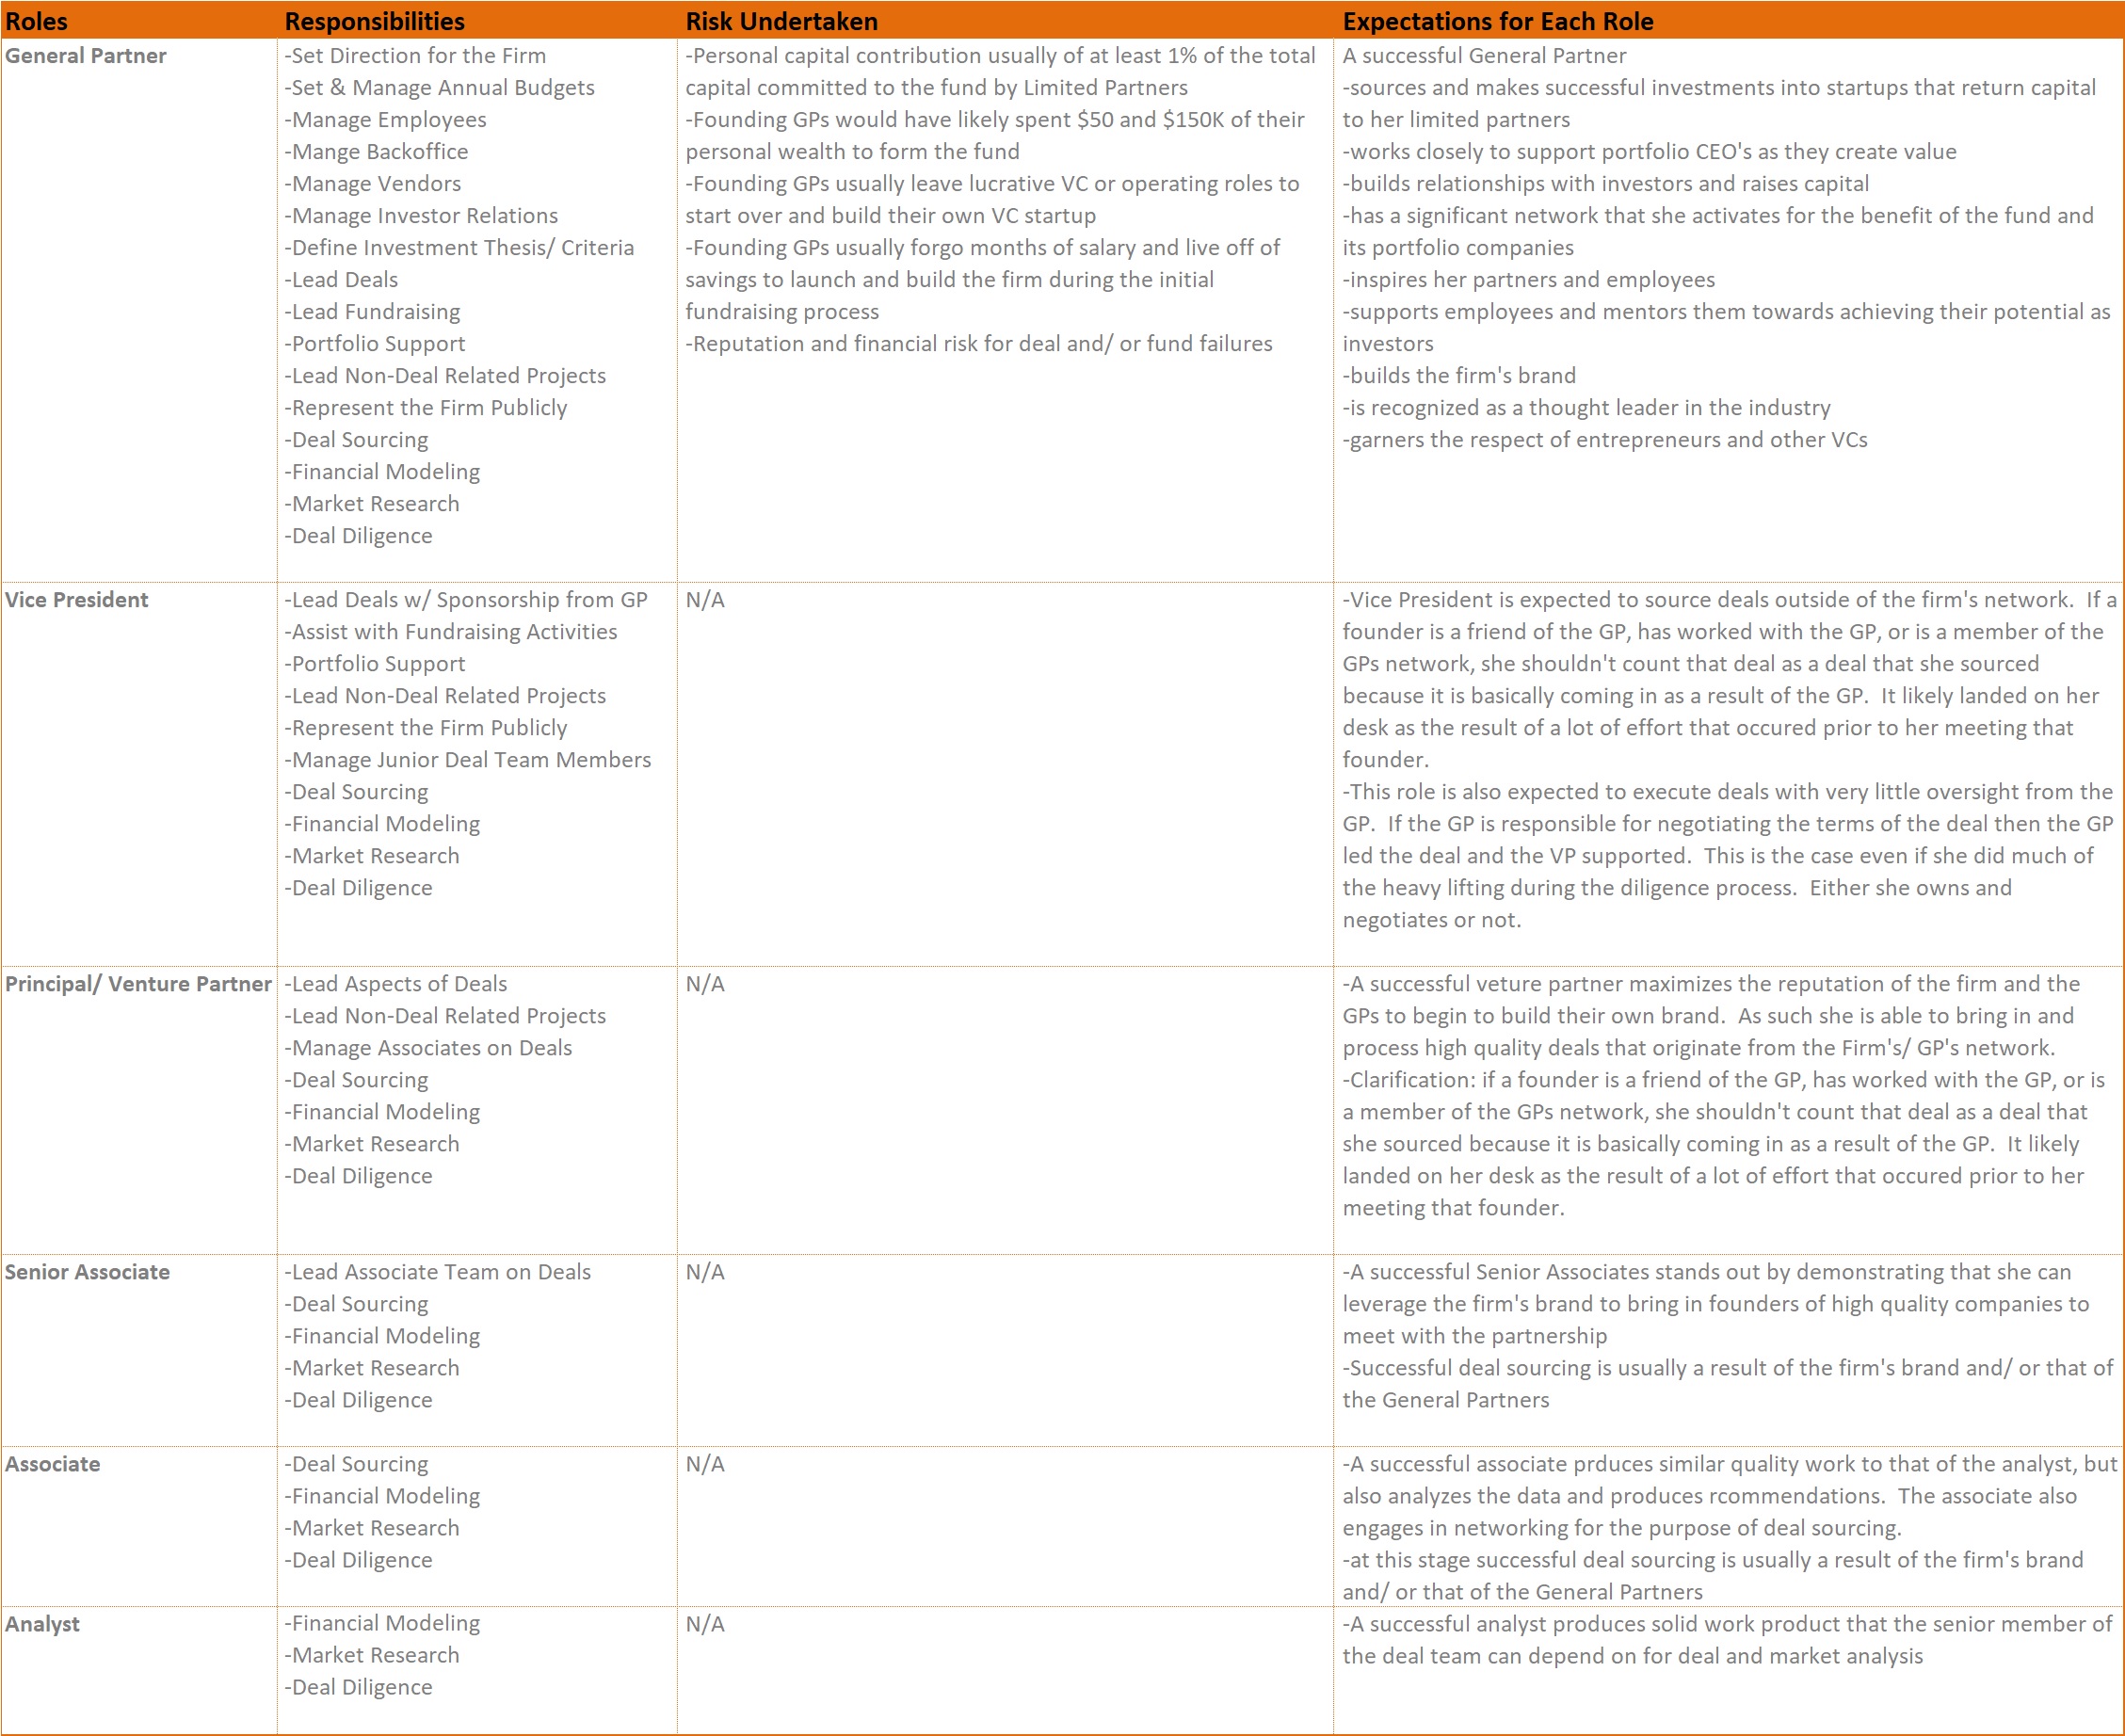 Responsibilities and expectations for various roles within a VC firm